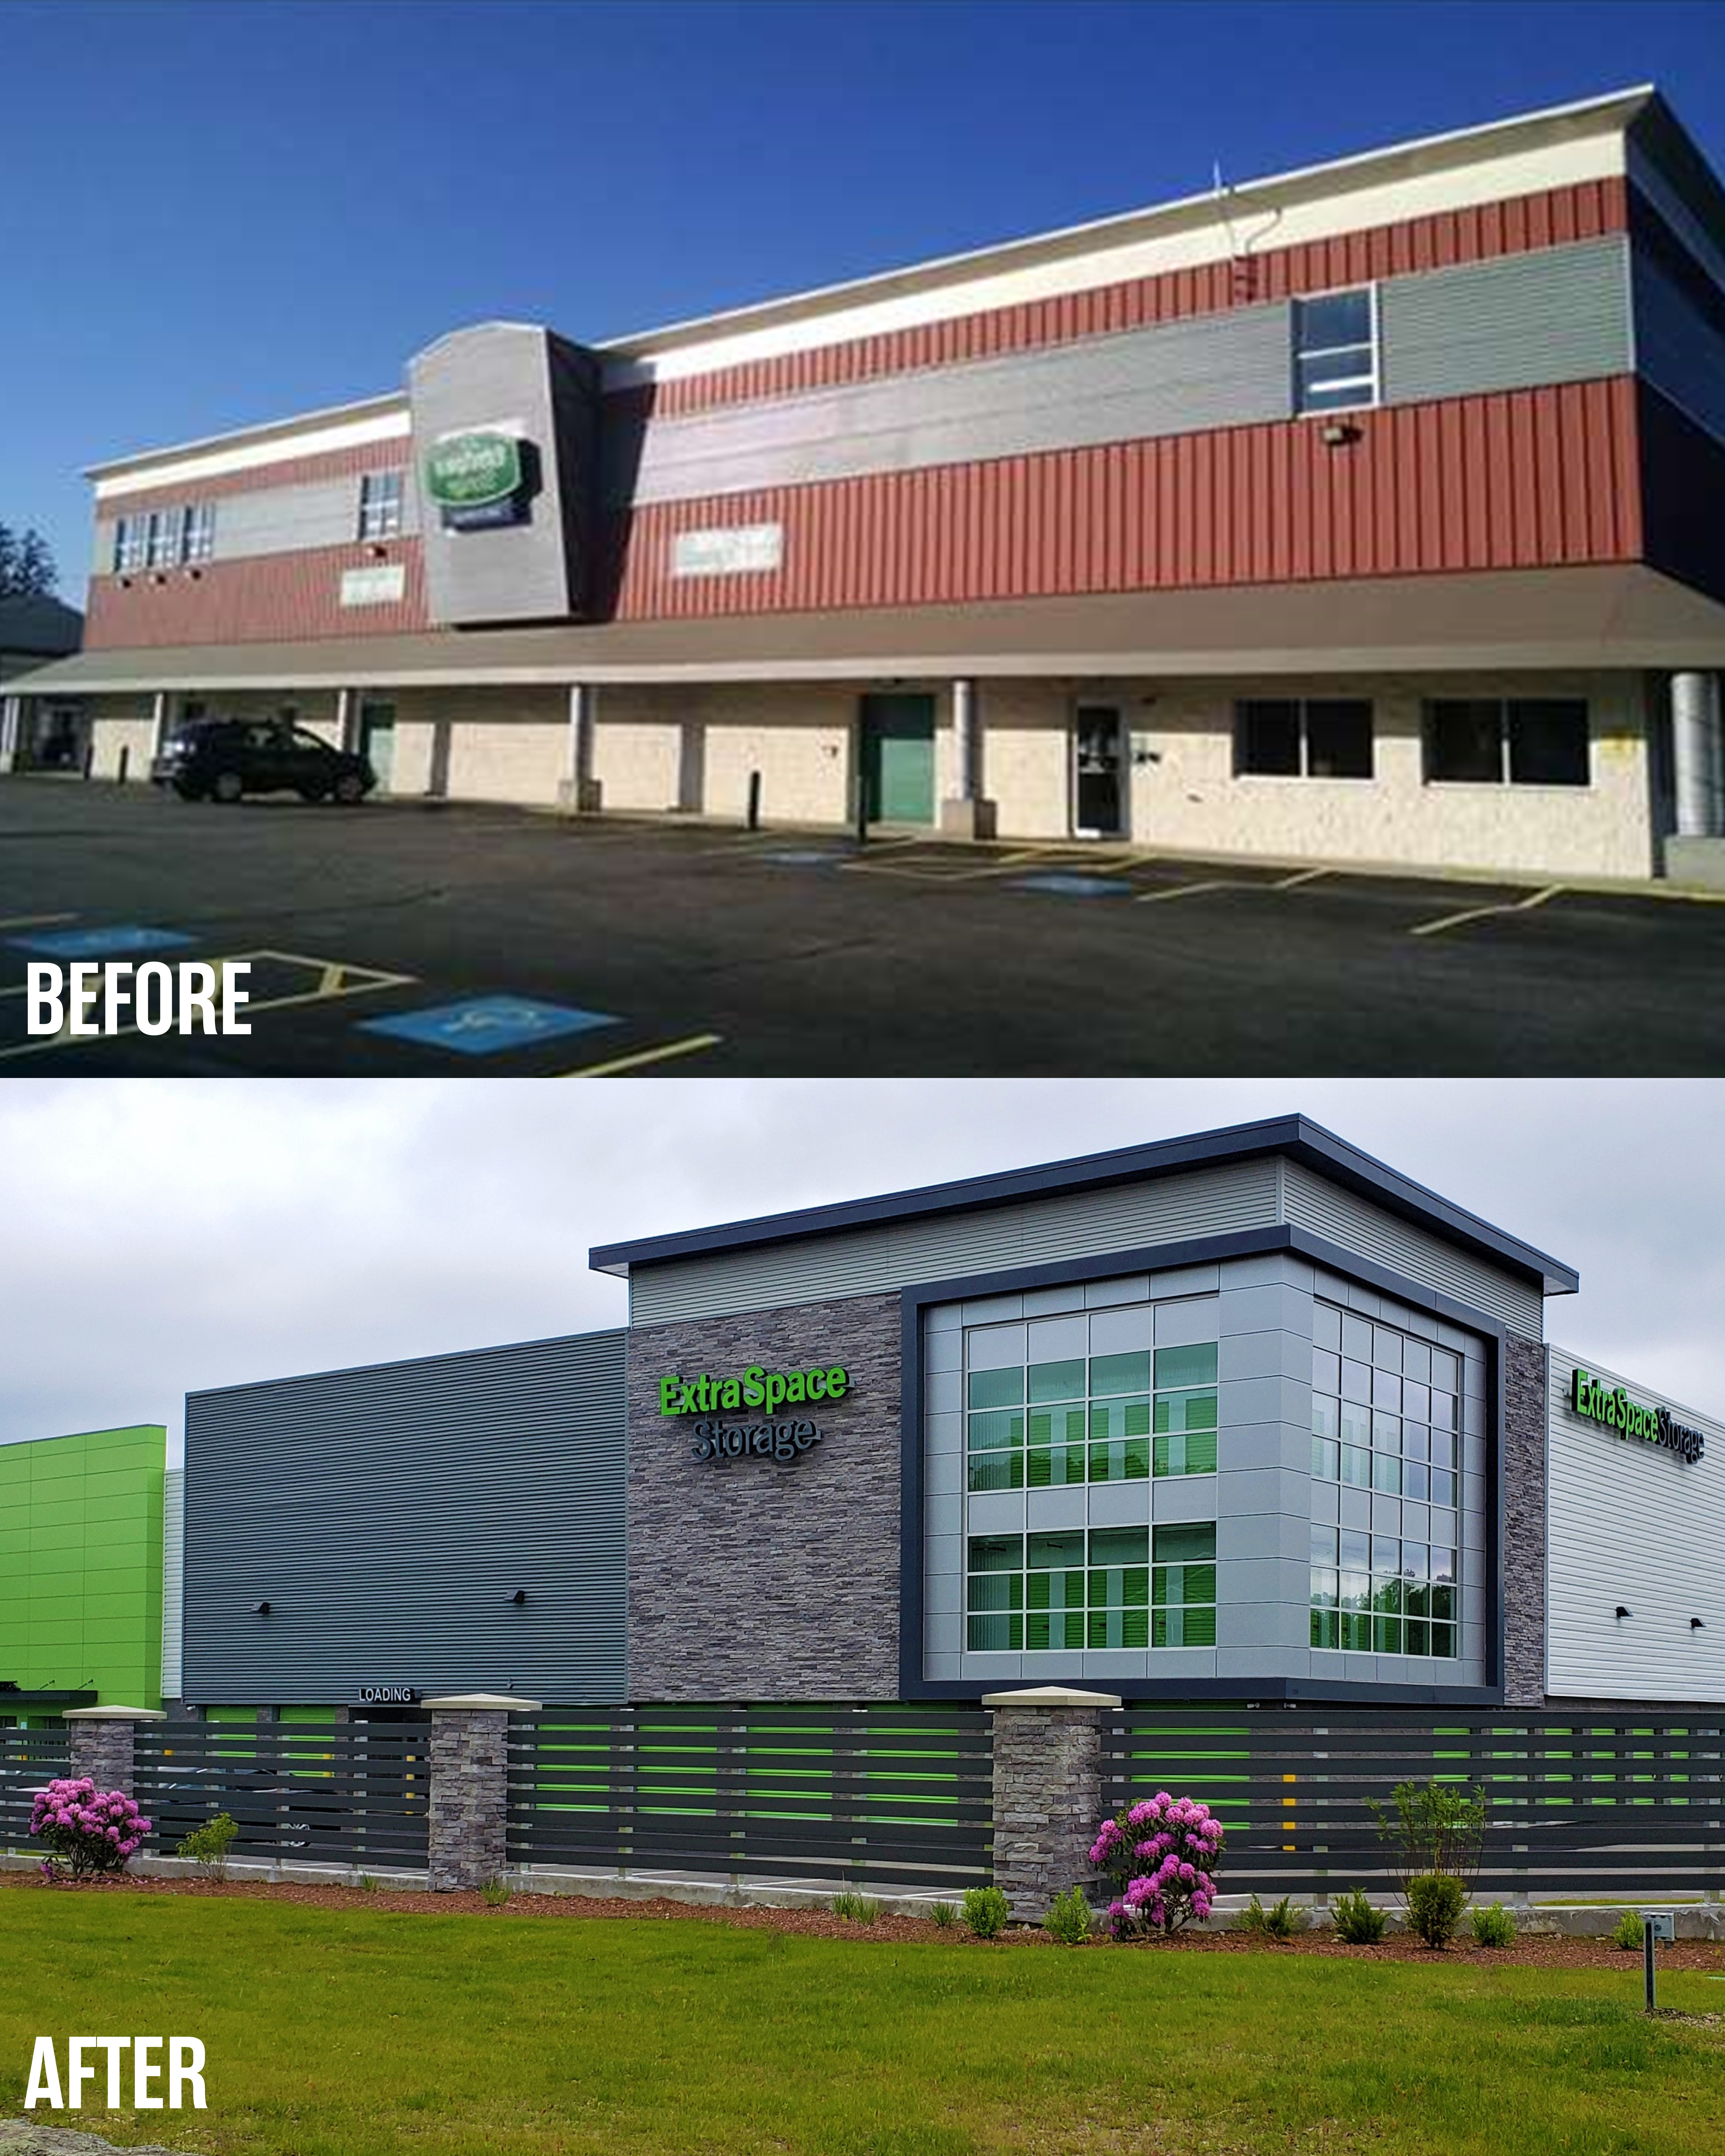 Before and After Photo of Extra Space Storage Expansion at 1256 Washington St in Weymouth, MA